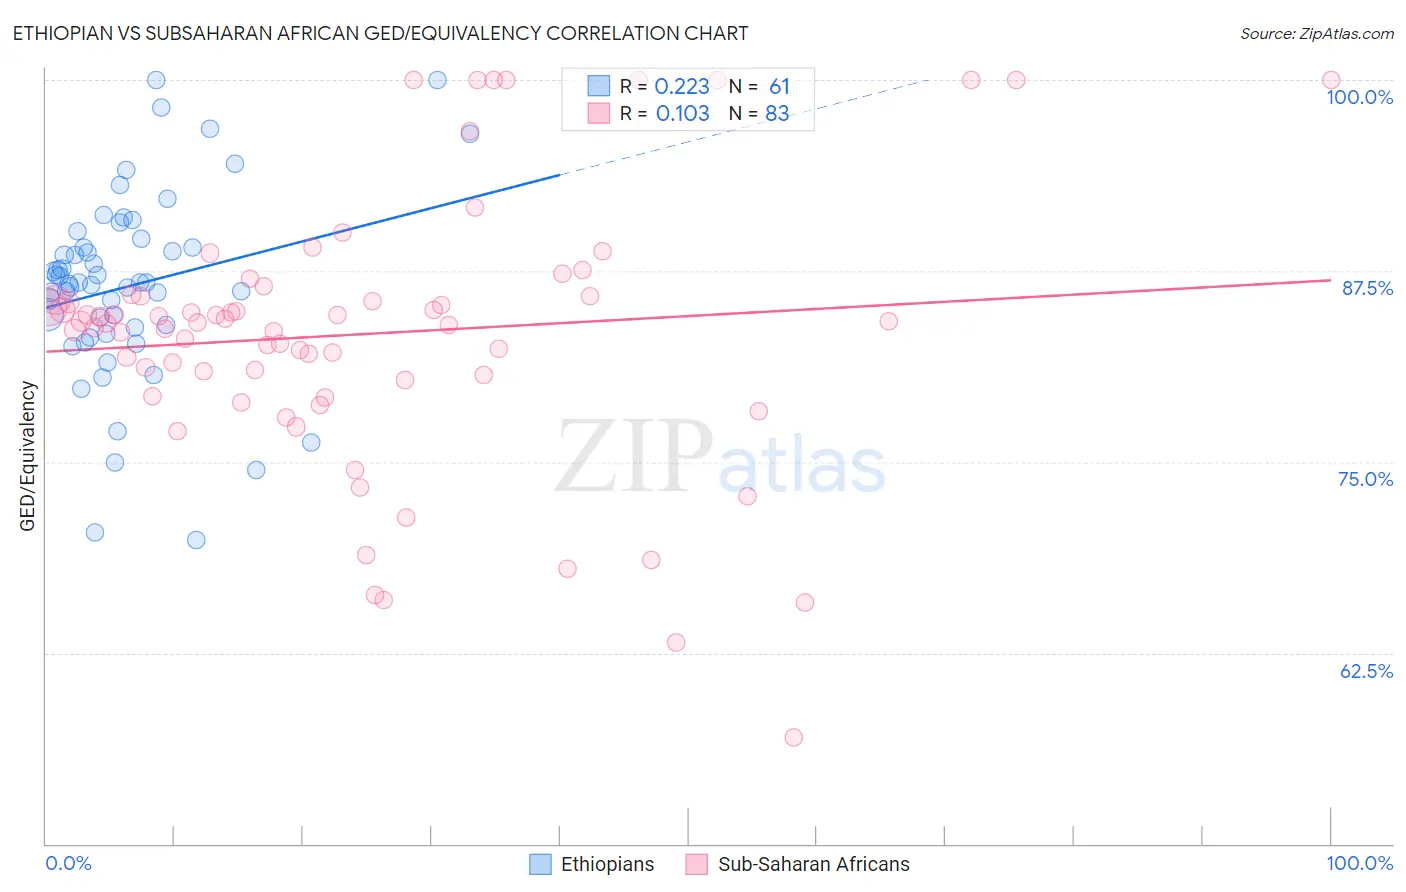 Ethiopian vs Subsaharan African GED/Equivalency